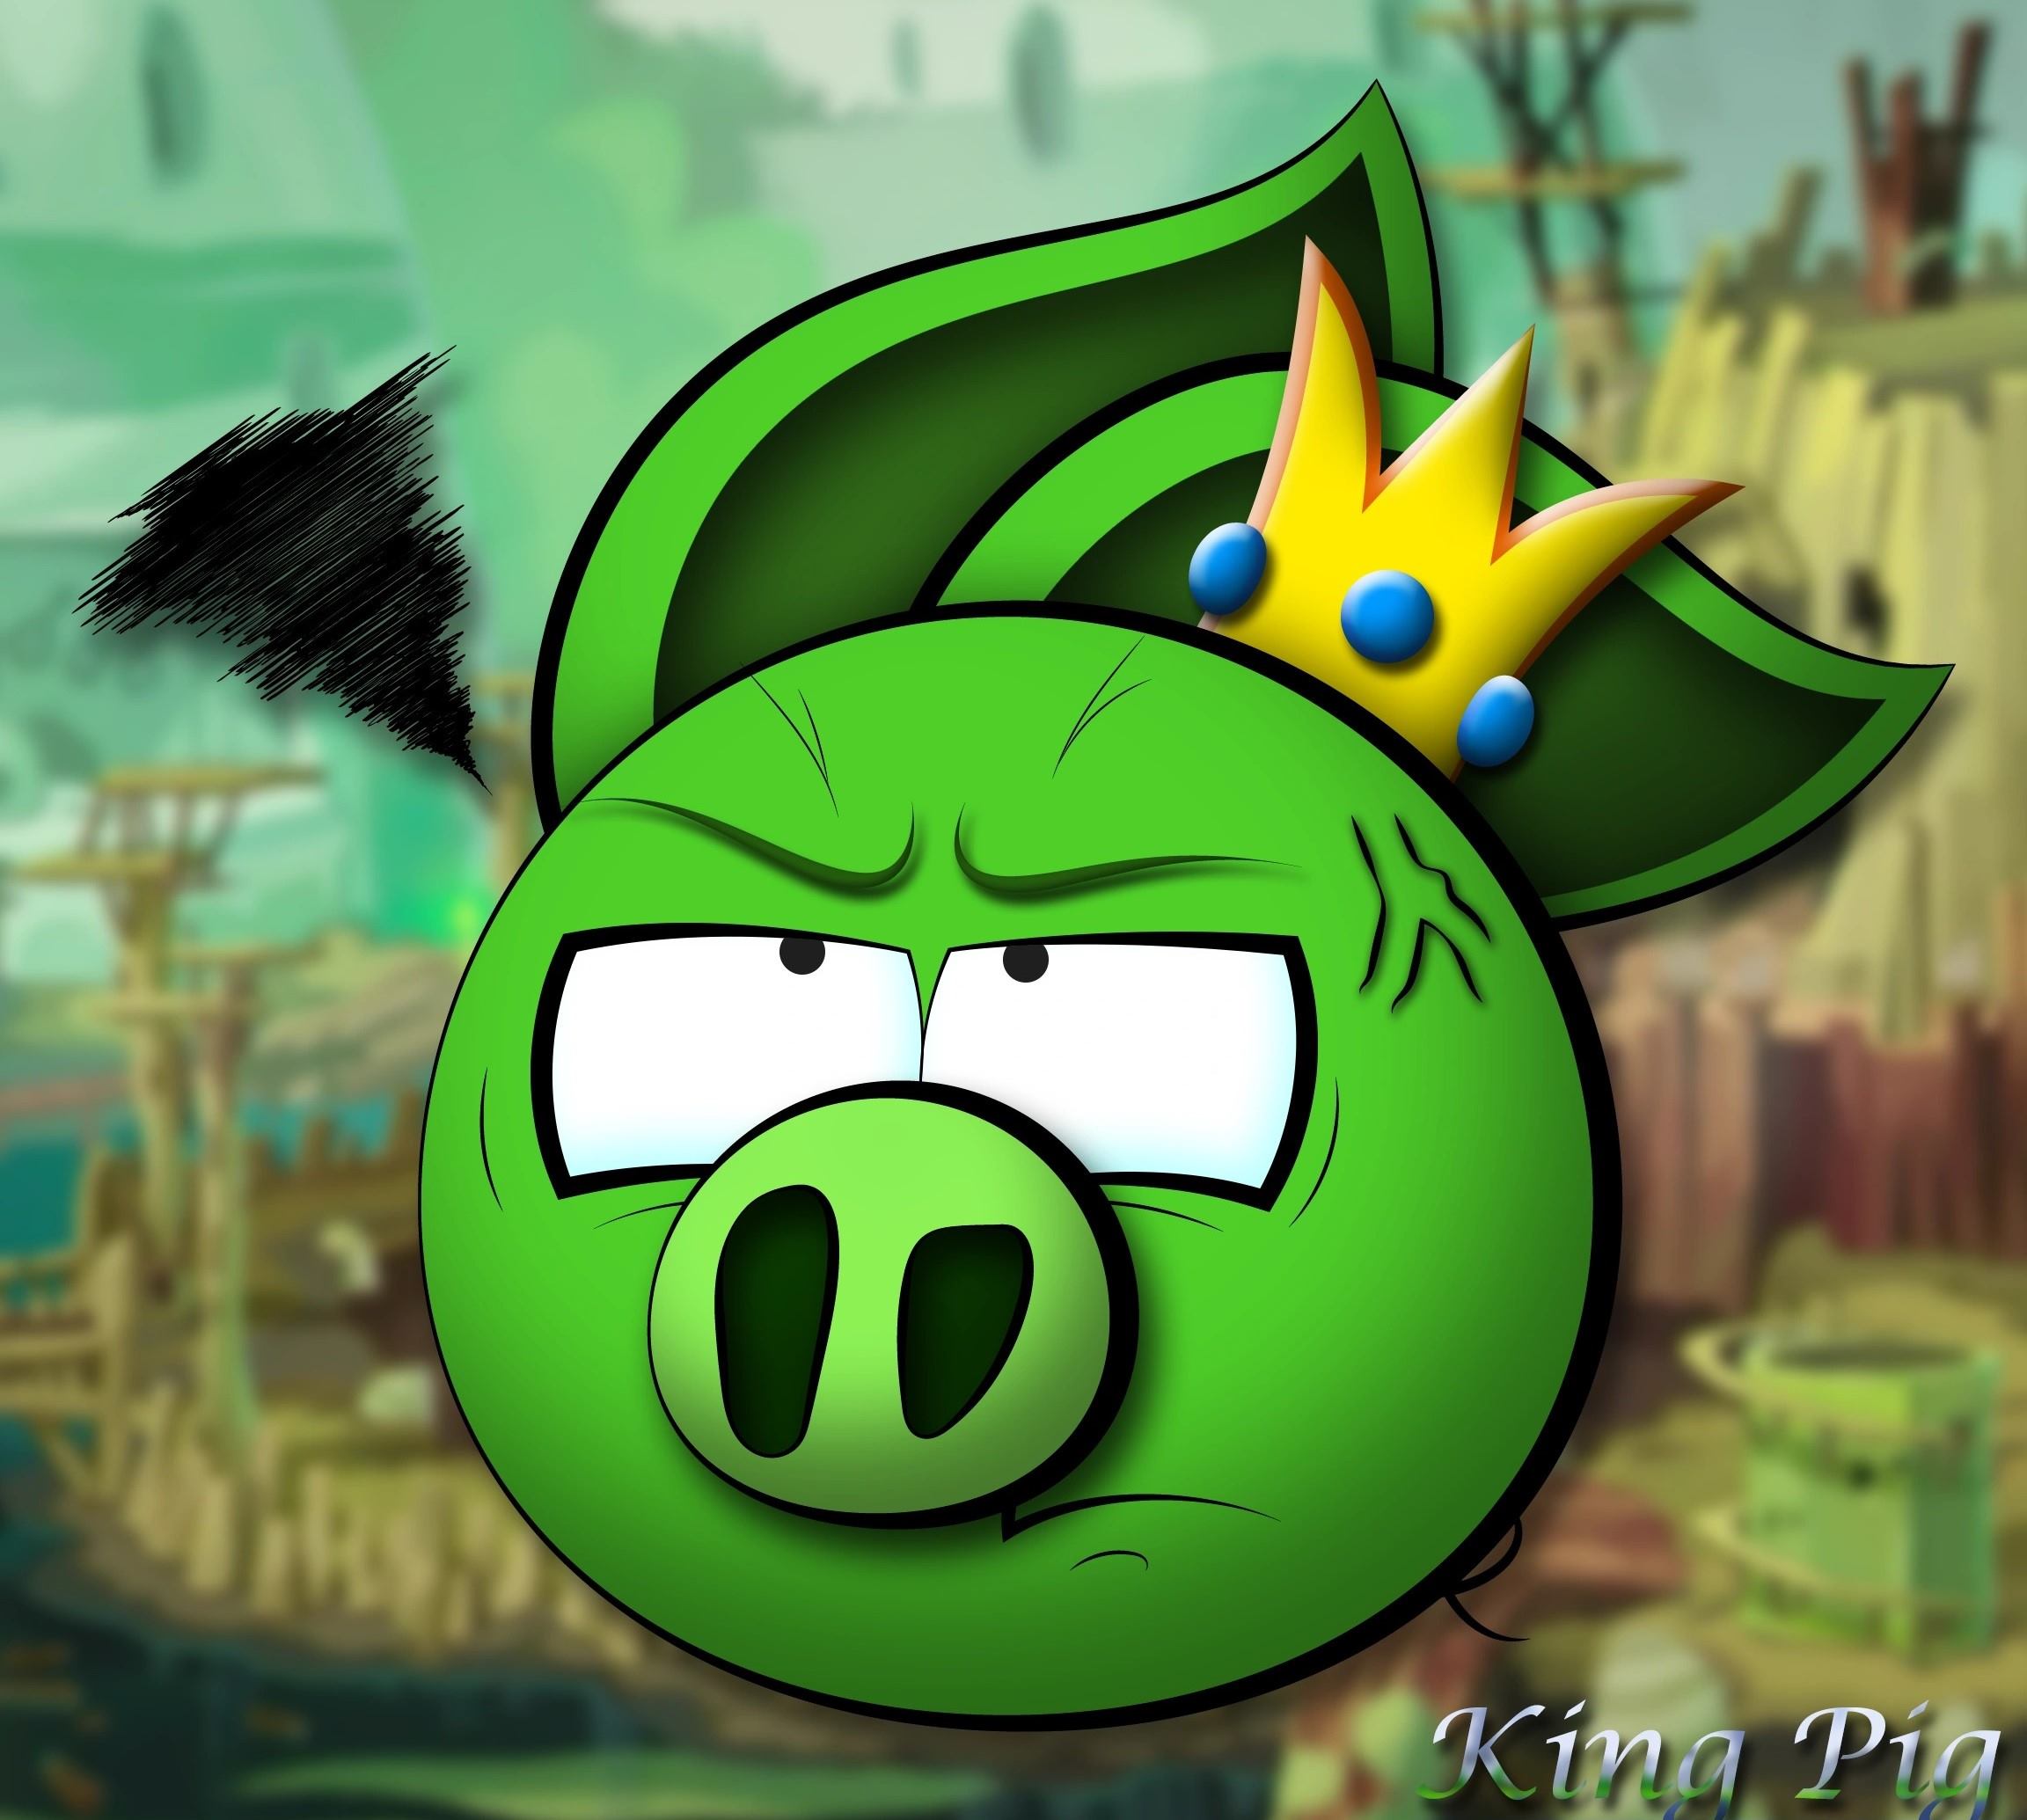 19-facts-about-king-pig-angry-birds-toons